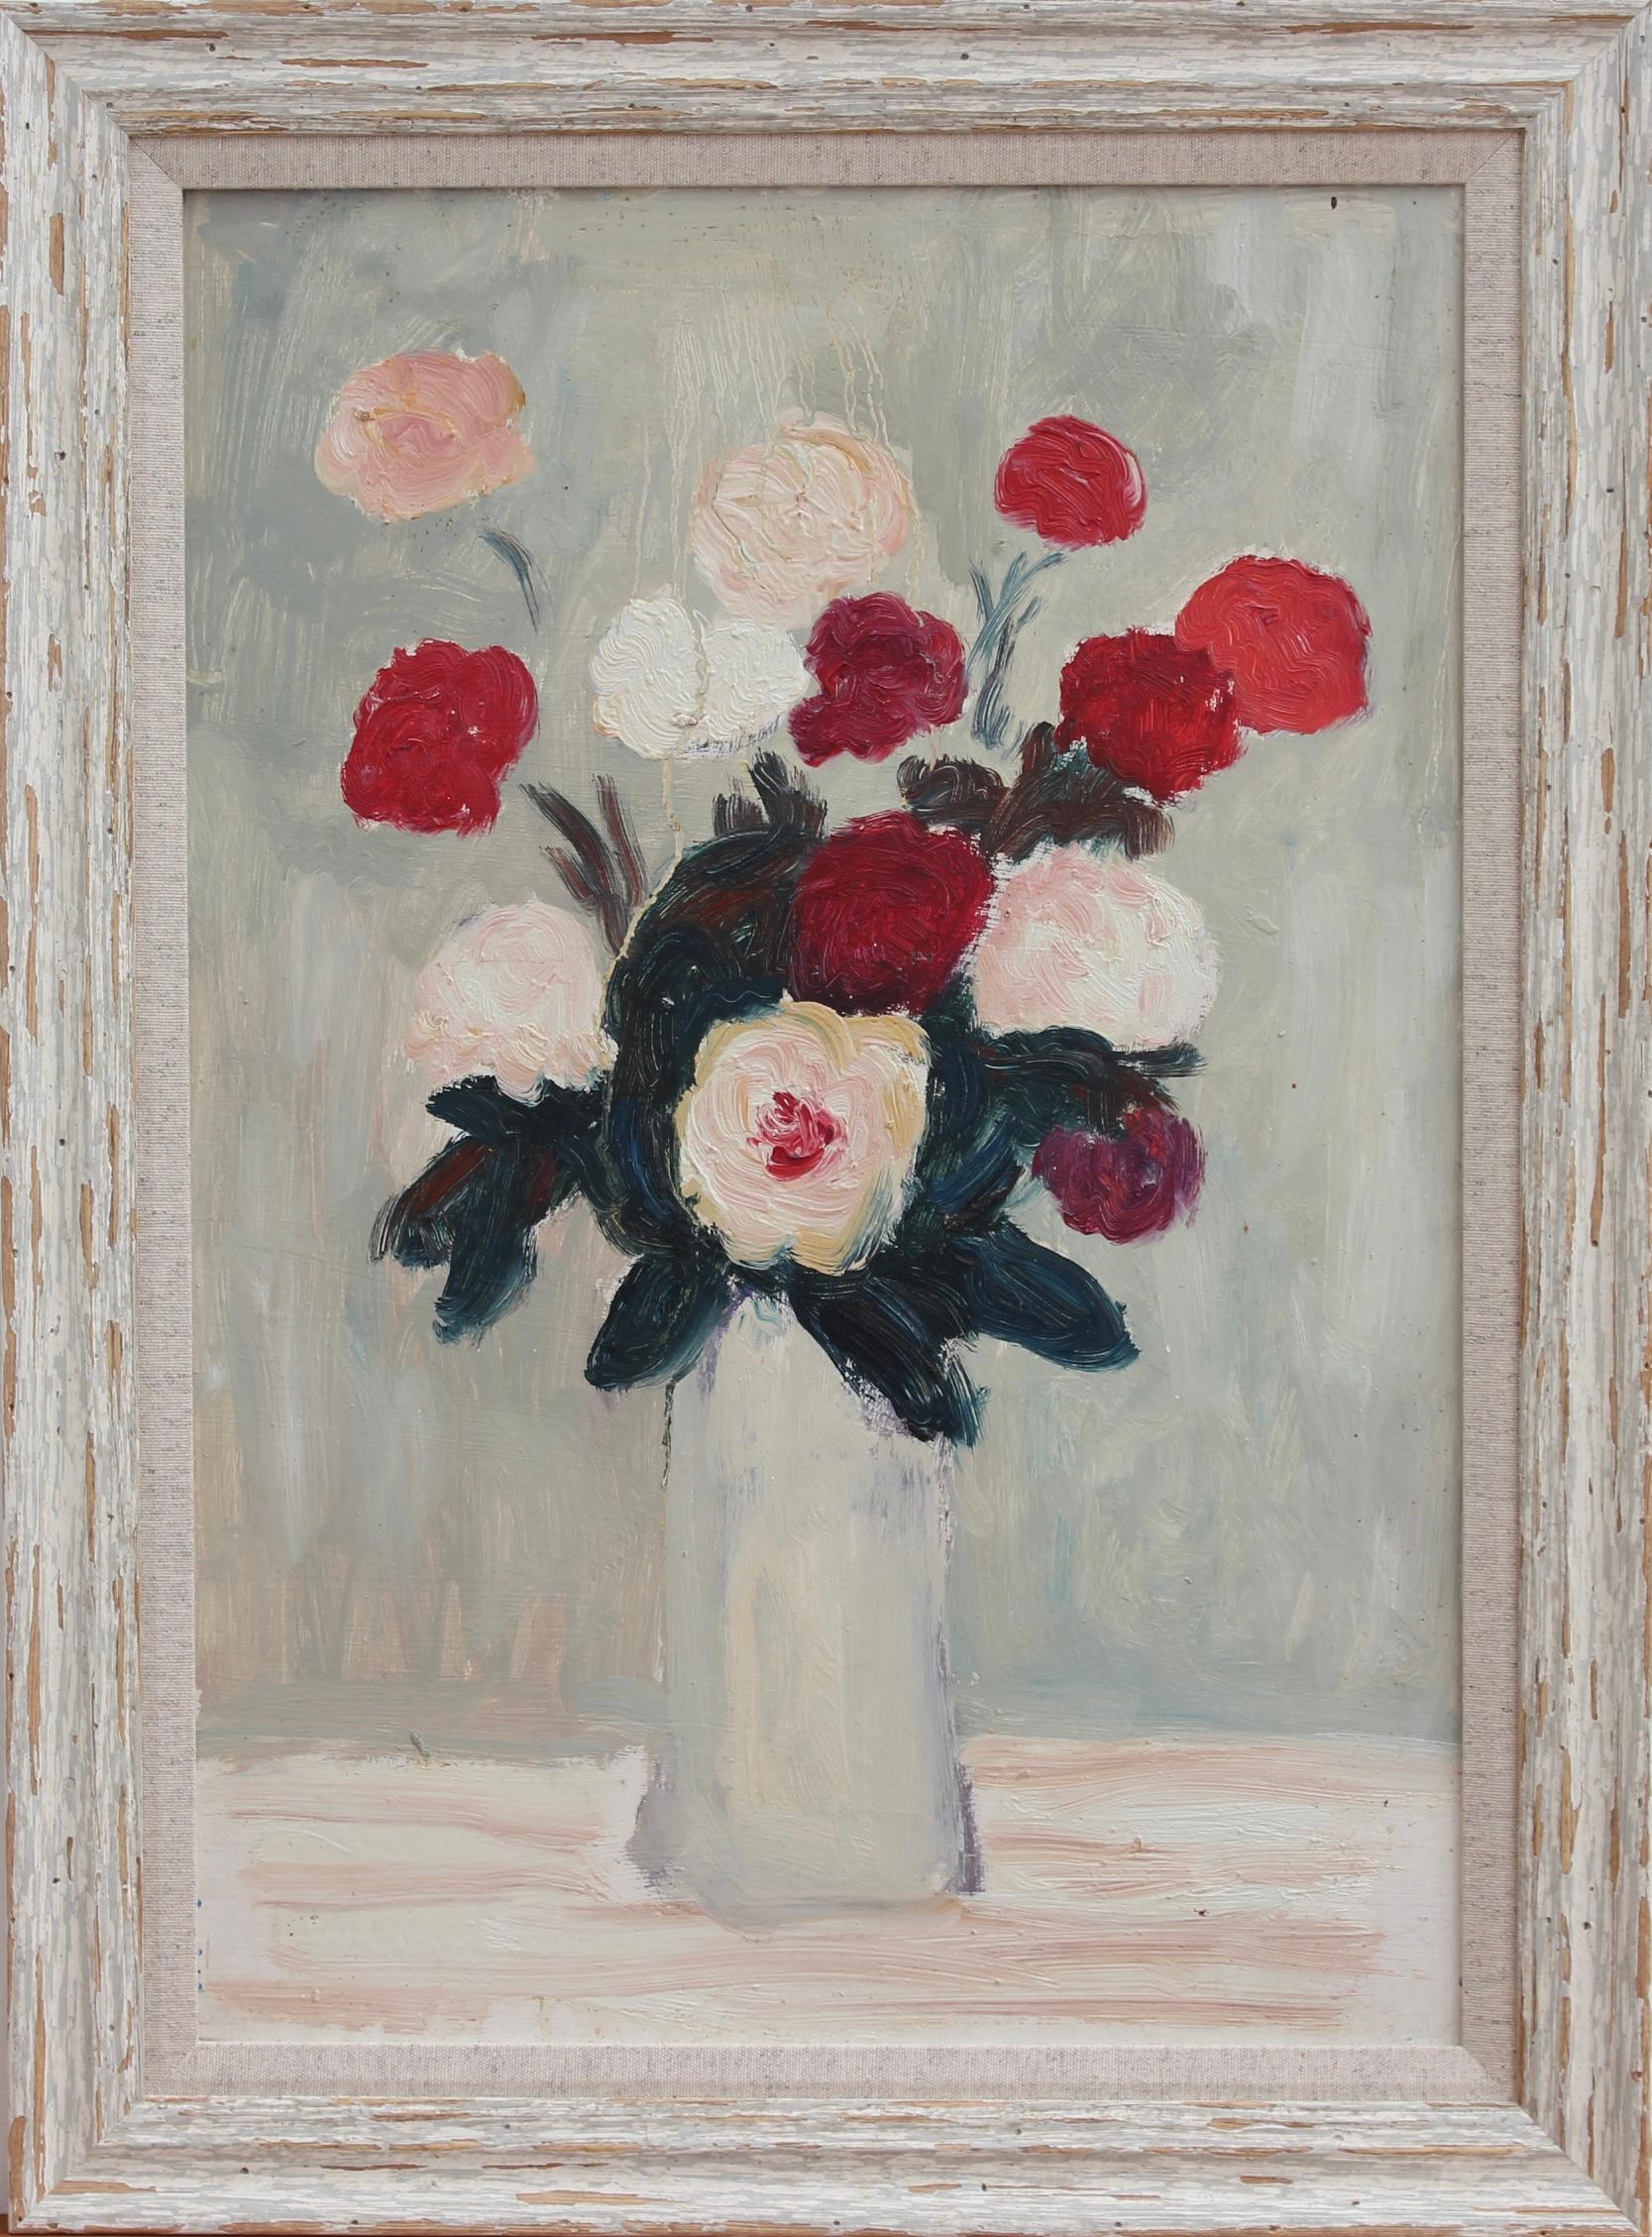 'Un Bouquet de Fleurs', oil on board, by Anna Costa (circa 1970s). In addition to her many landscapes, Costa painted many still lifes, mostly bouquets of flowers as subject. In this charming painting, the artist uses a virtual monochrome backdrop to